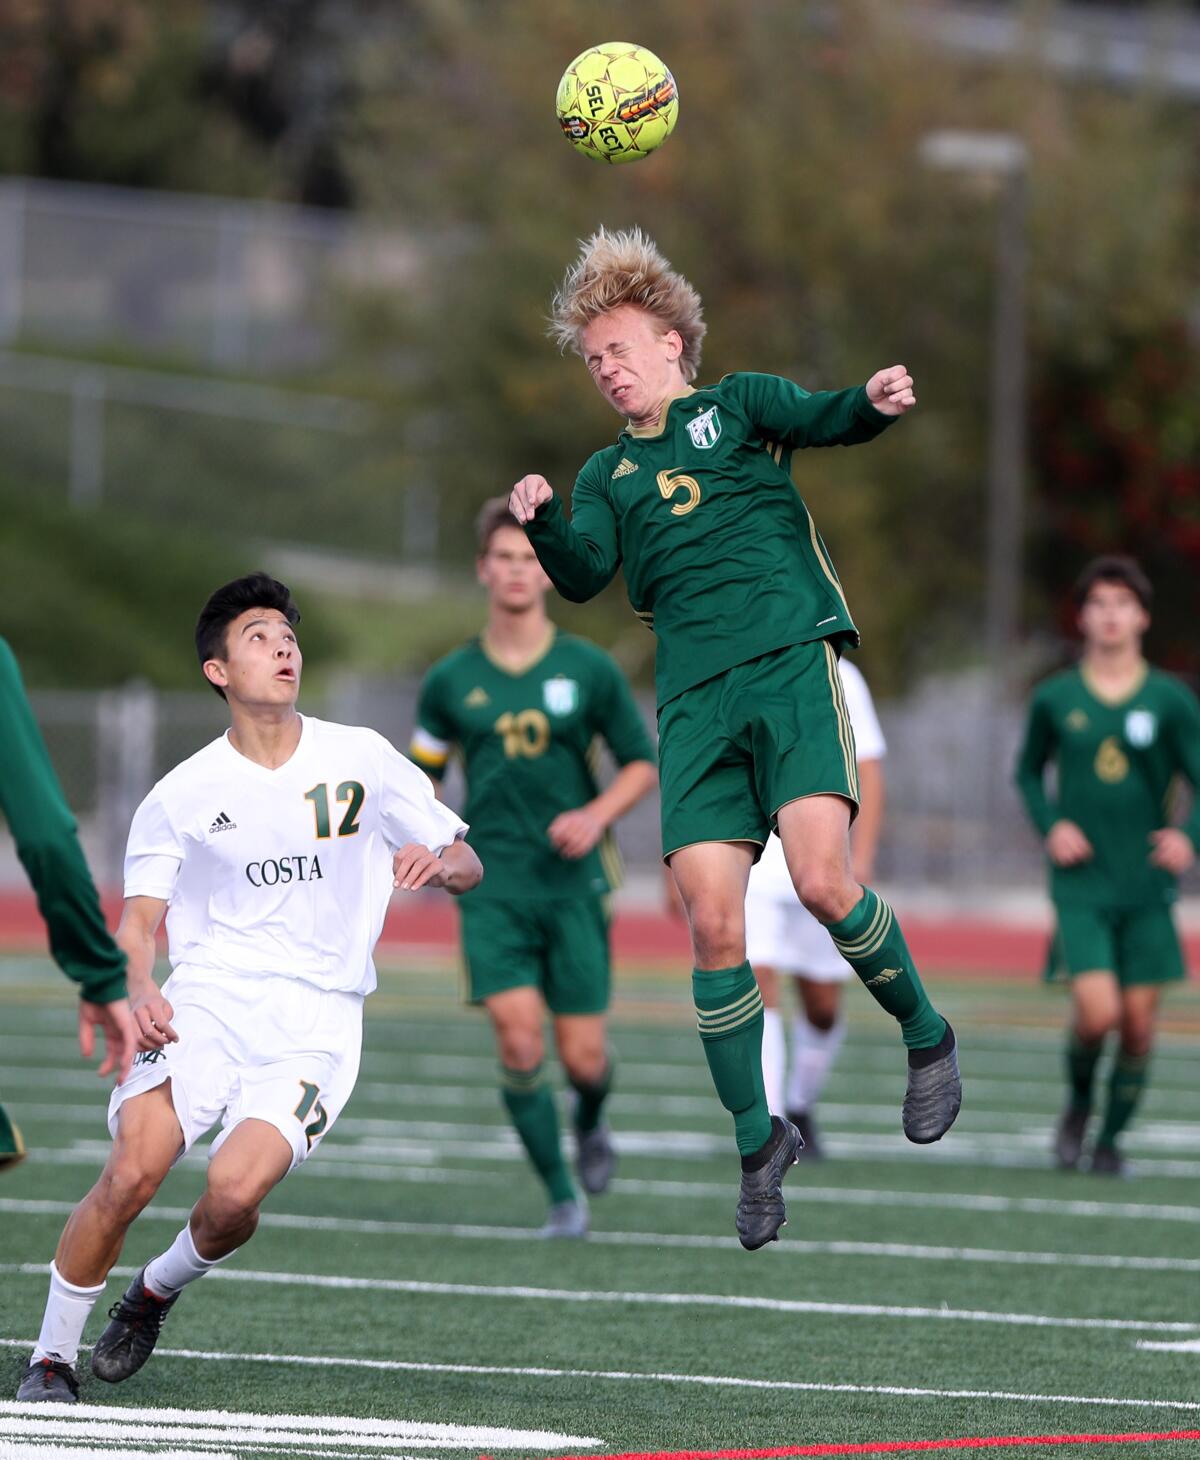 Edison's Marcus Henze goes up for a header in the Laguna Hills Hawks Invitational title match against Mira Costa on Dec. 28, 2019.